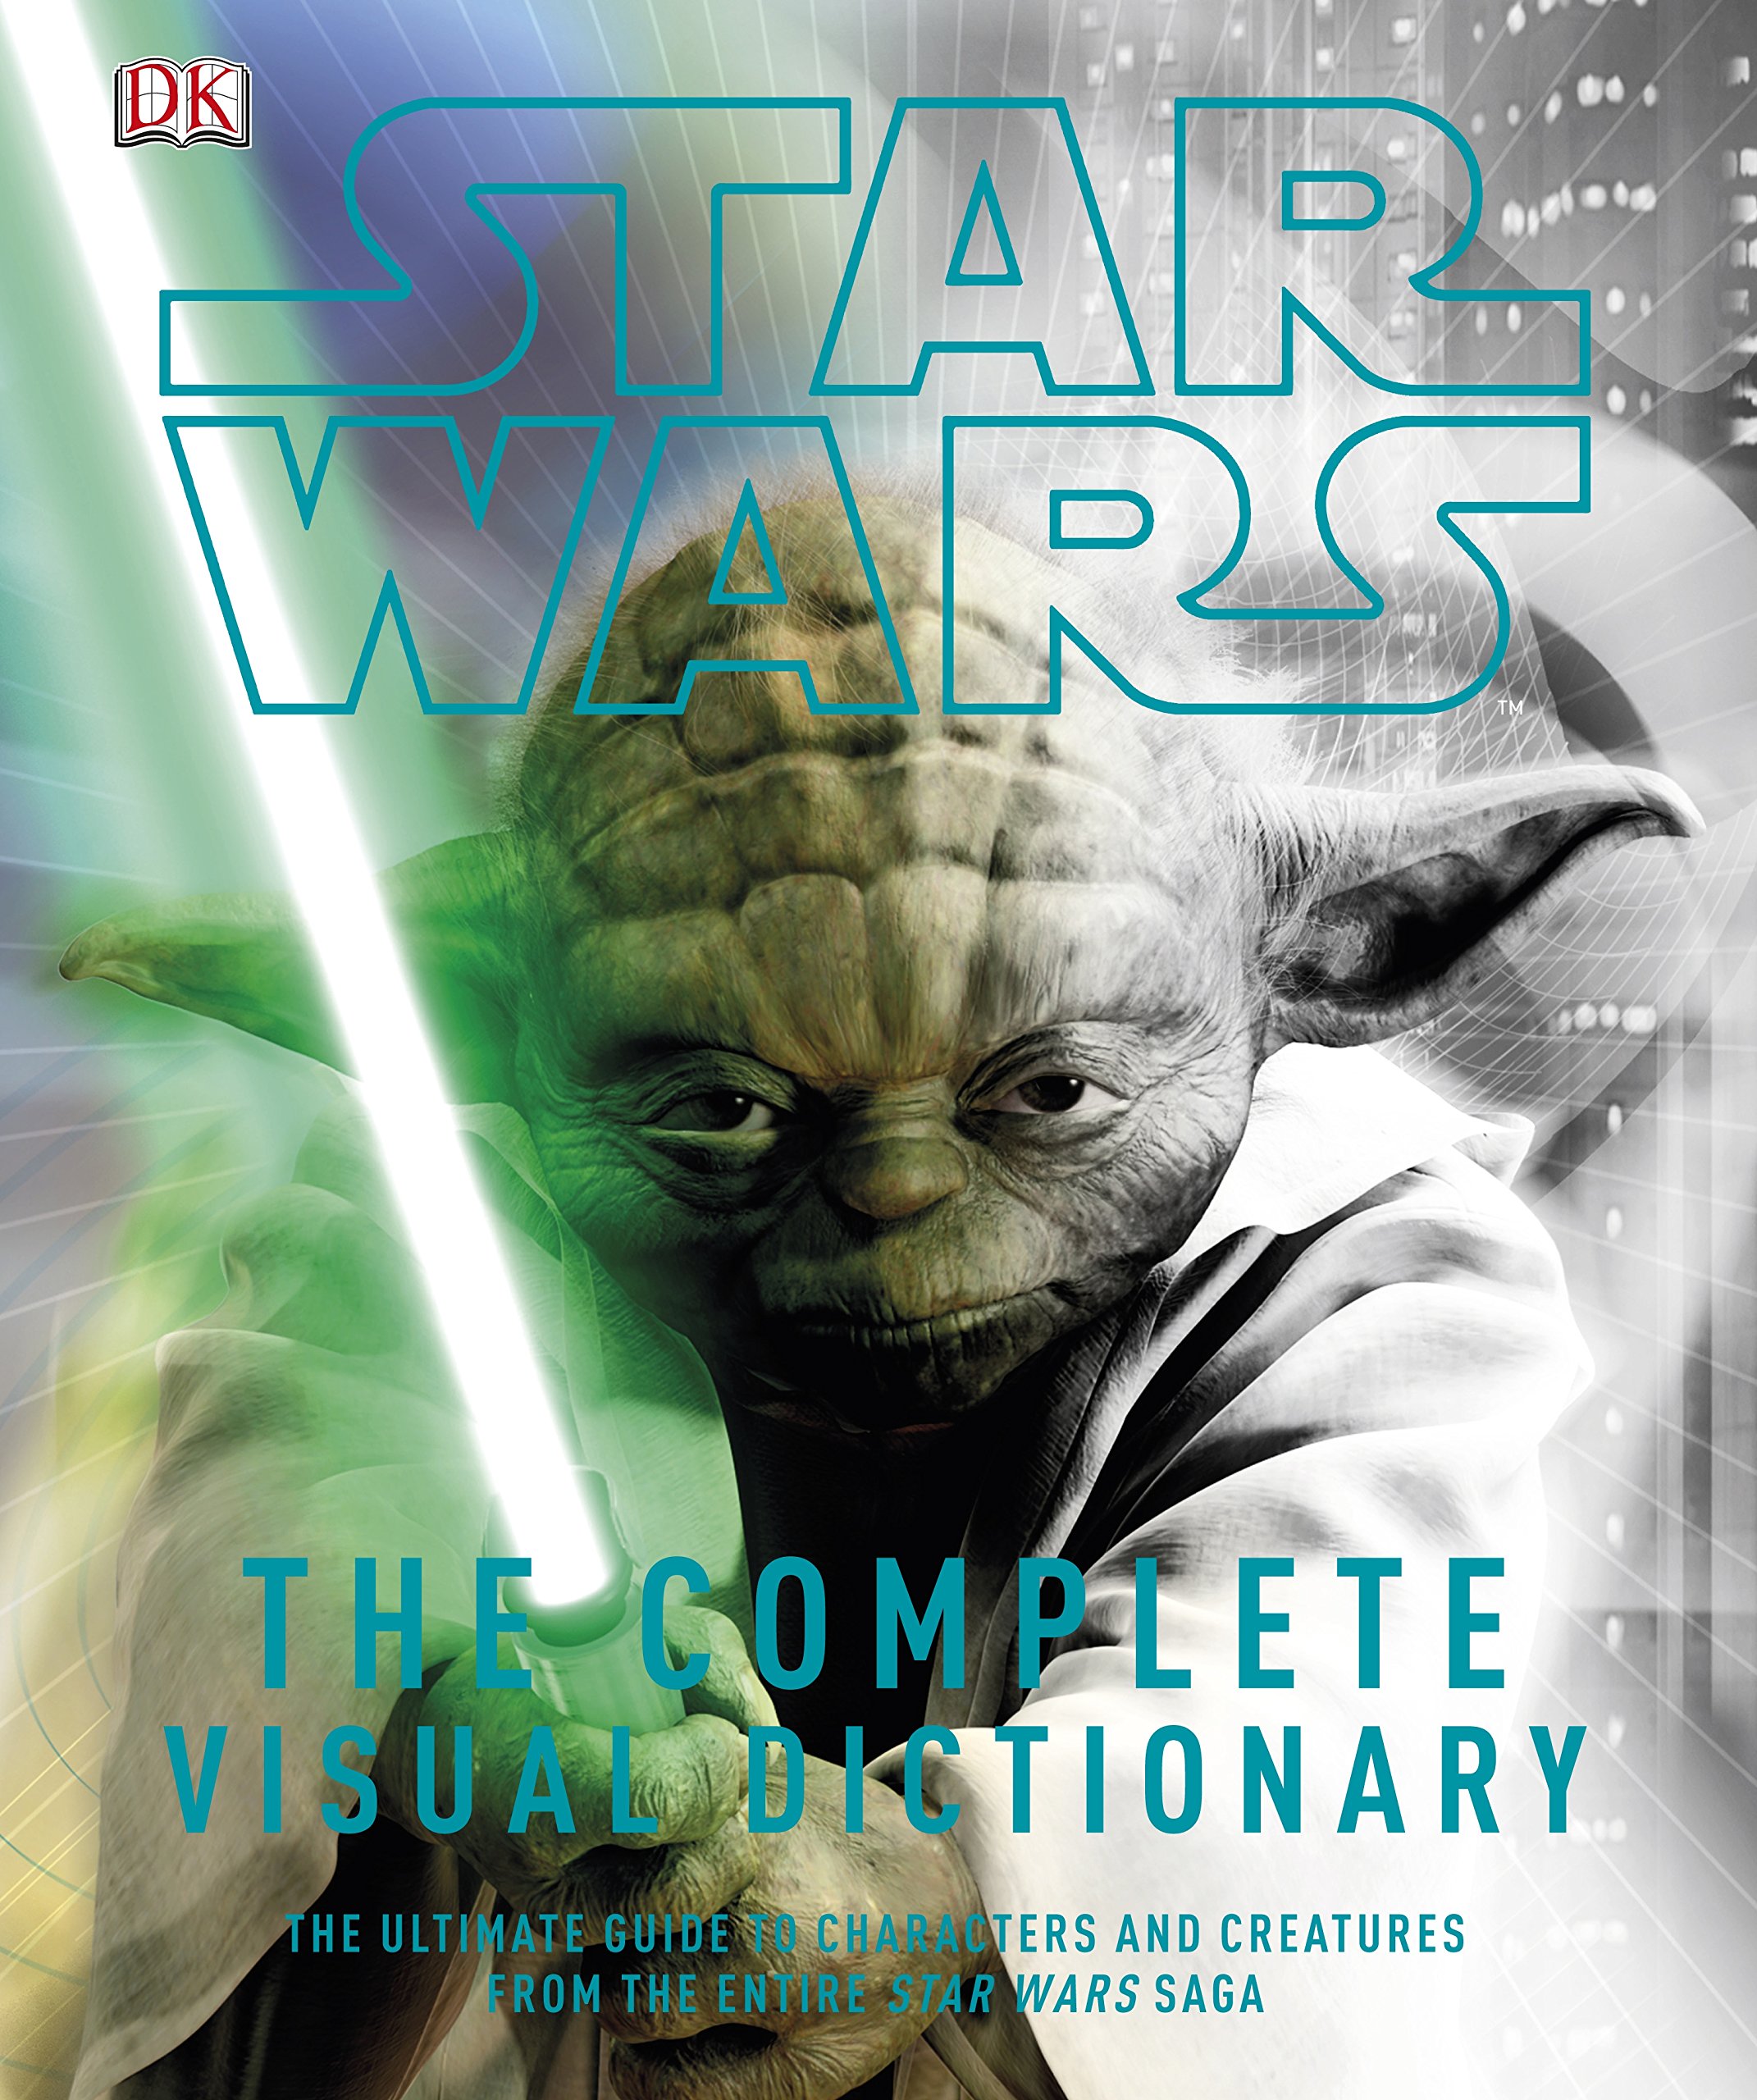 Star Wars : The Complete Dictionary